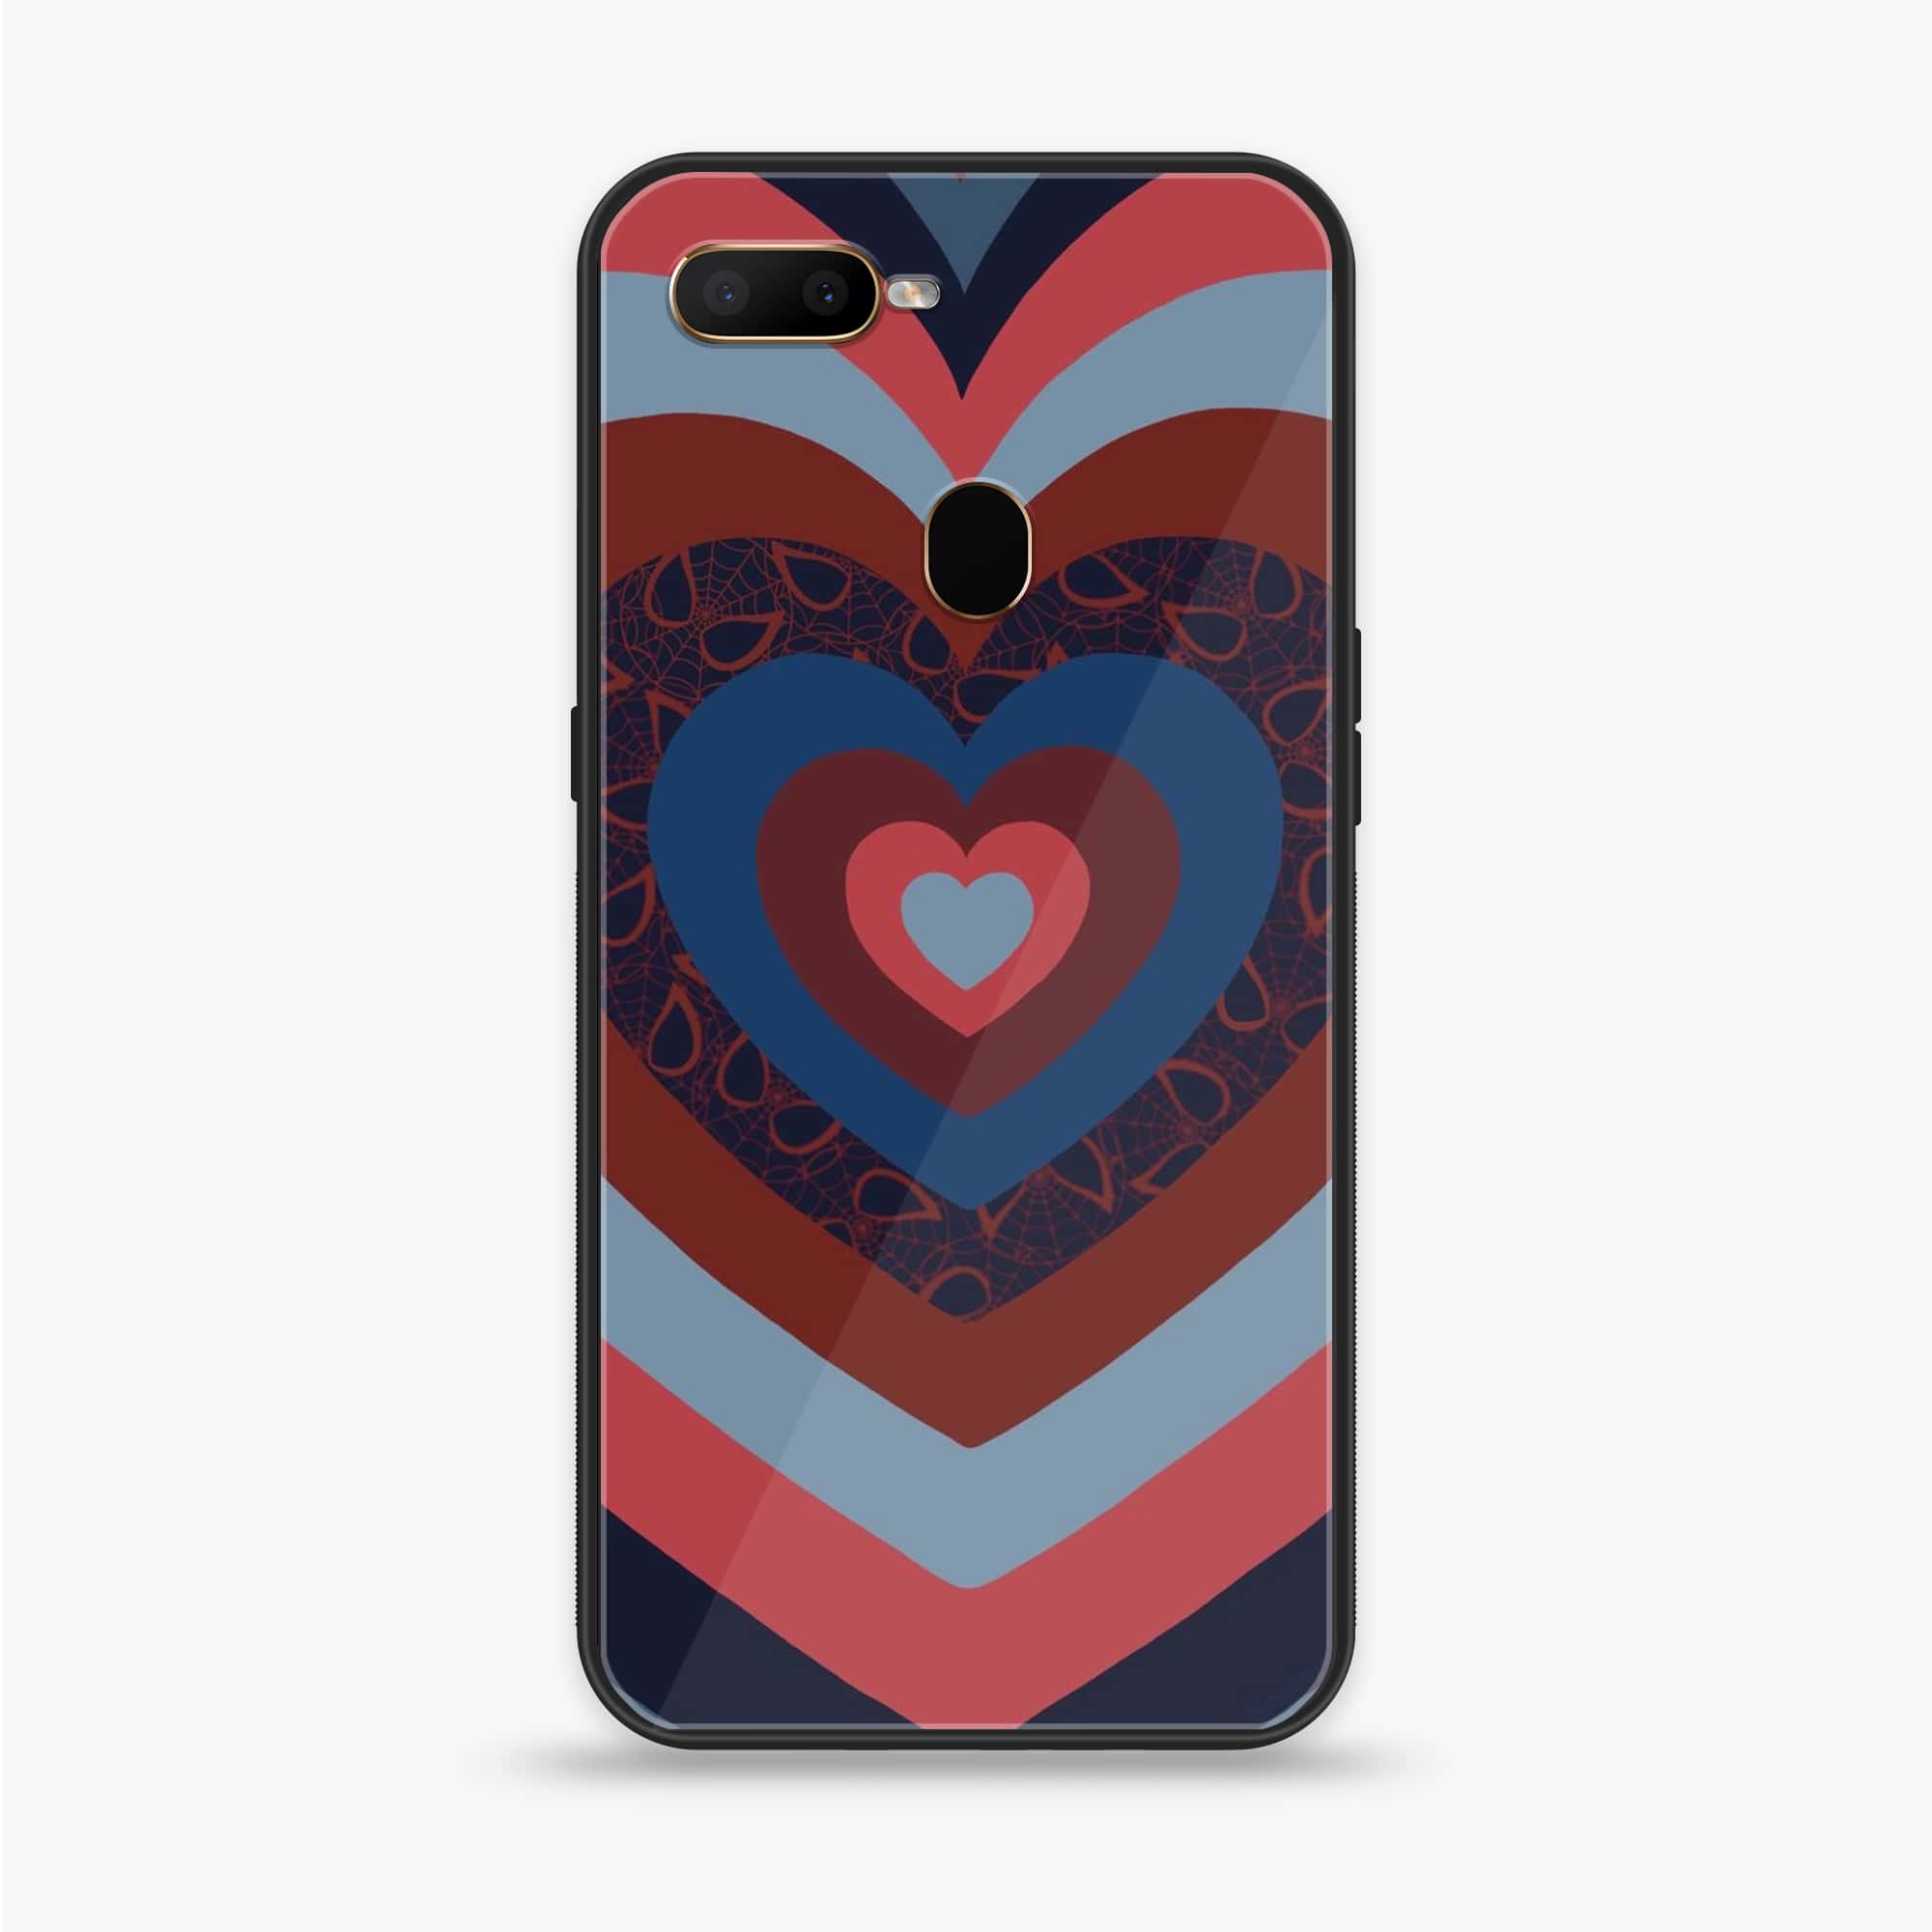 OPPO A5s - Heart Beat Series 2.0 - Premium Printed Glass soft Bumper shock Proof Case